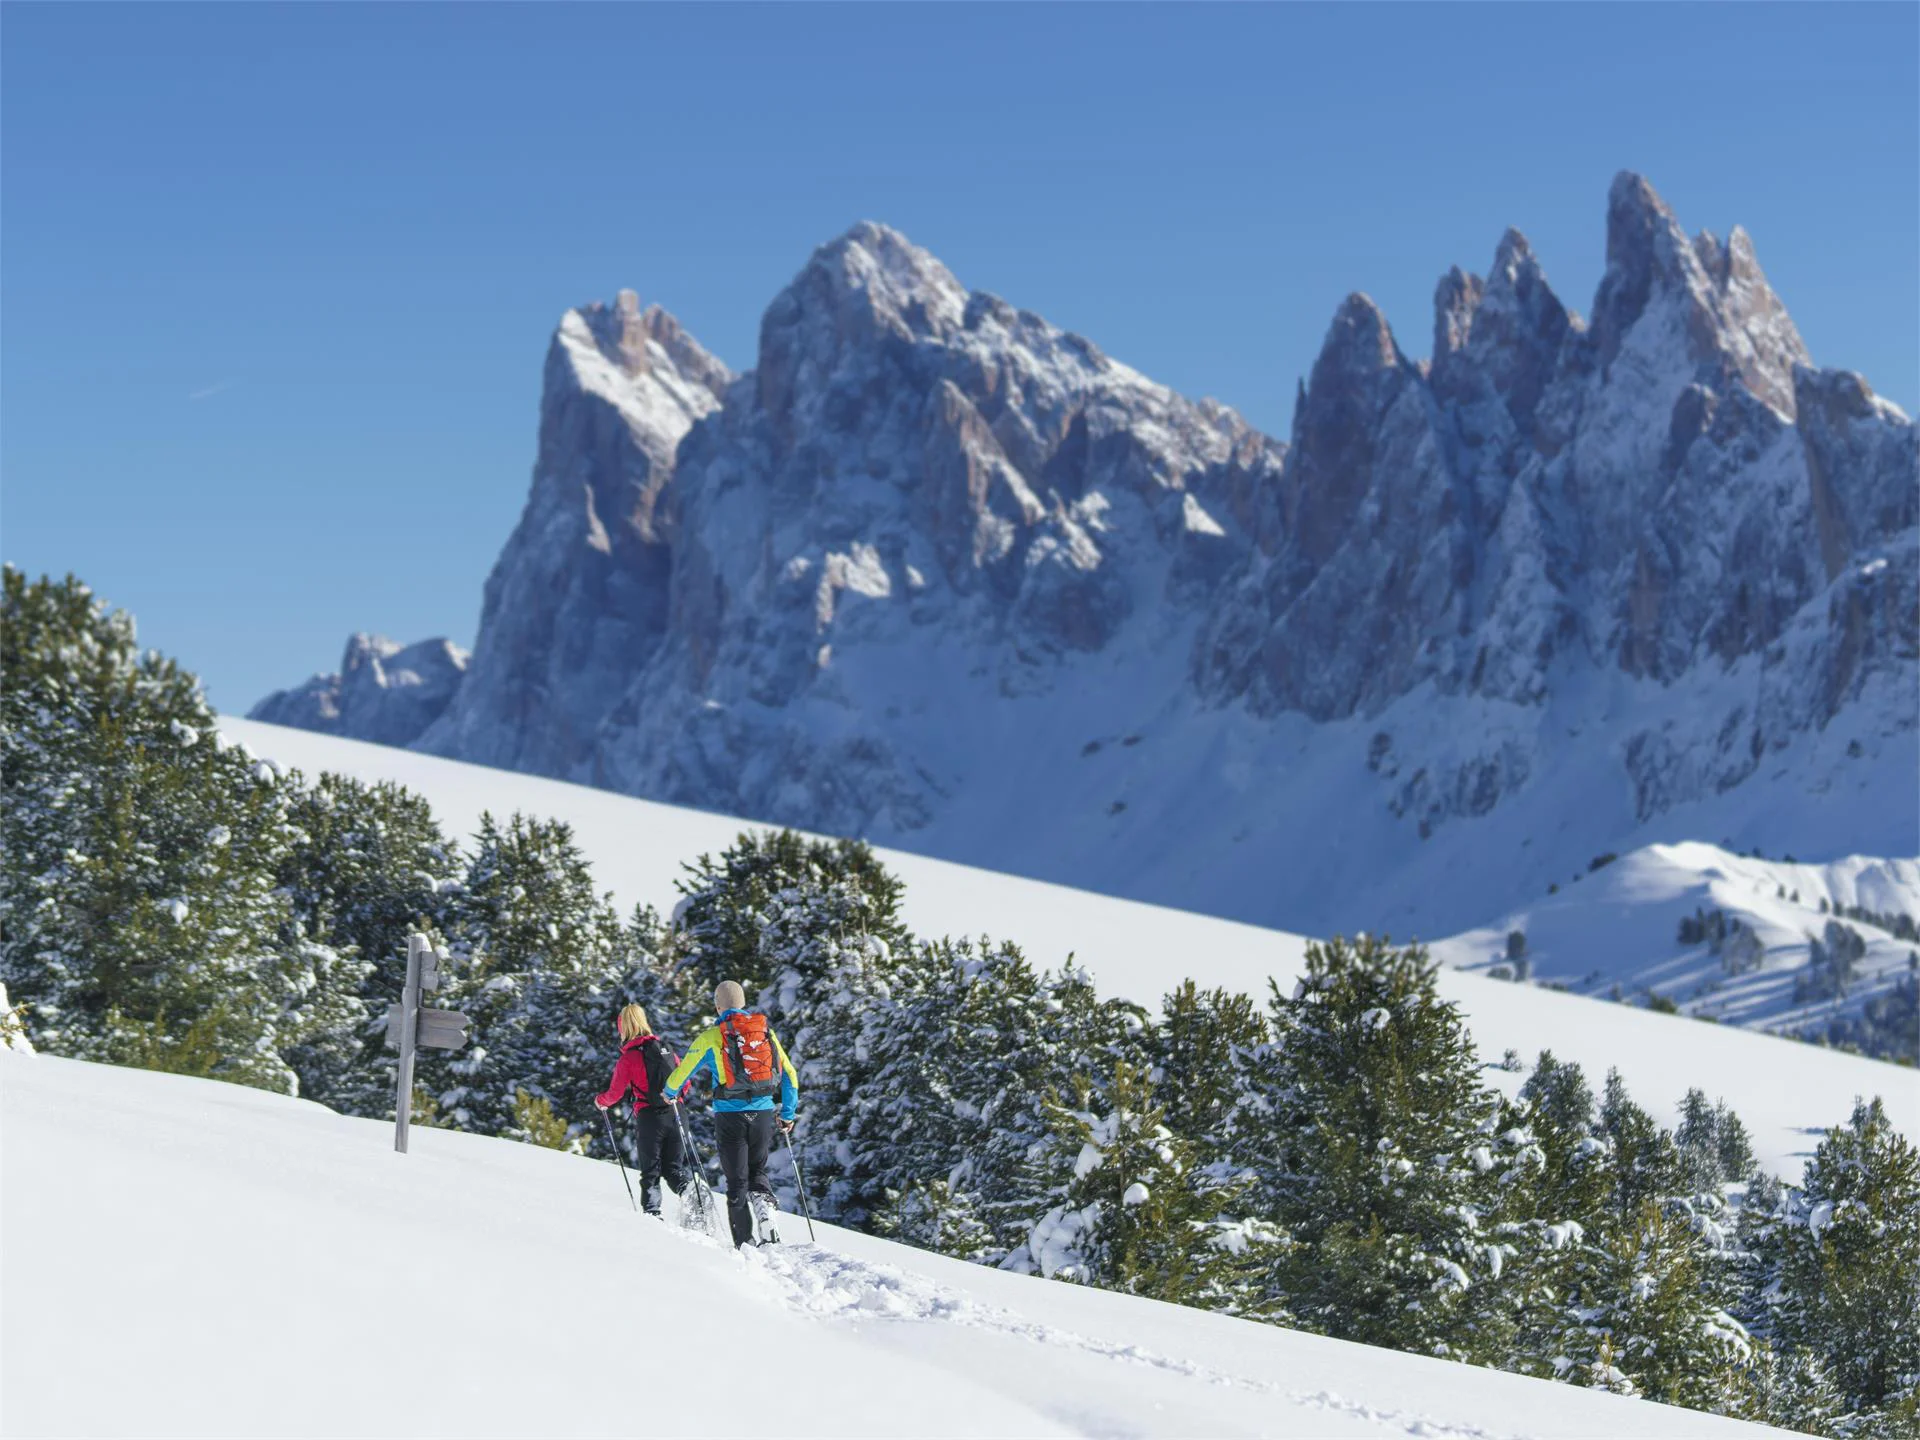 Guided snowshoe hike - On the move in silence Brixen/Bressanone 1 suedtirol.info